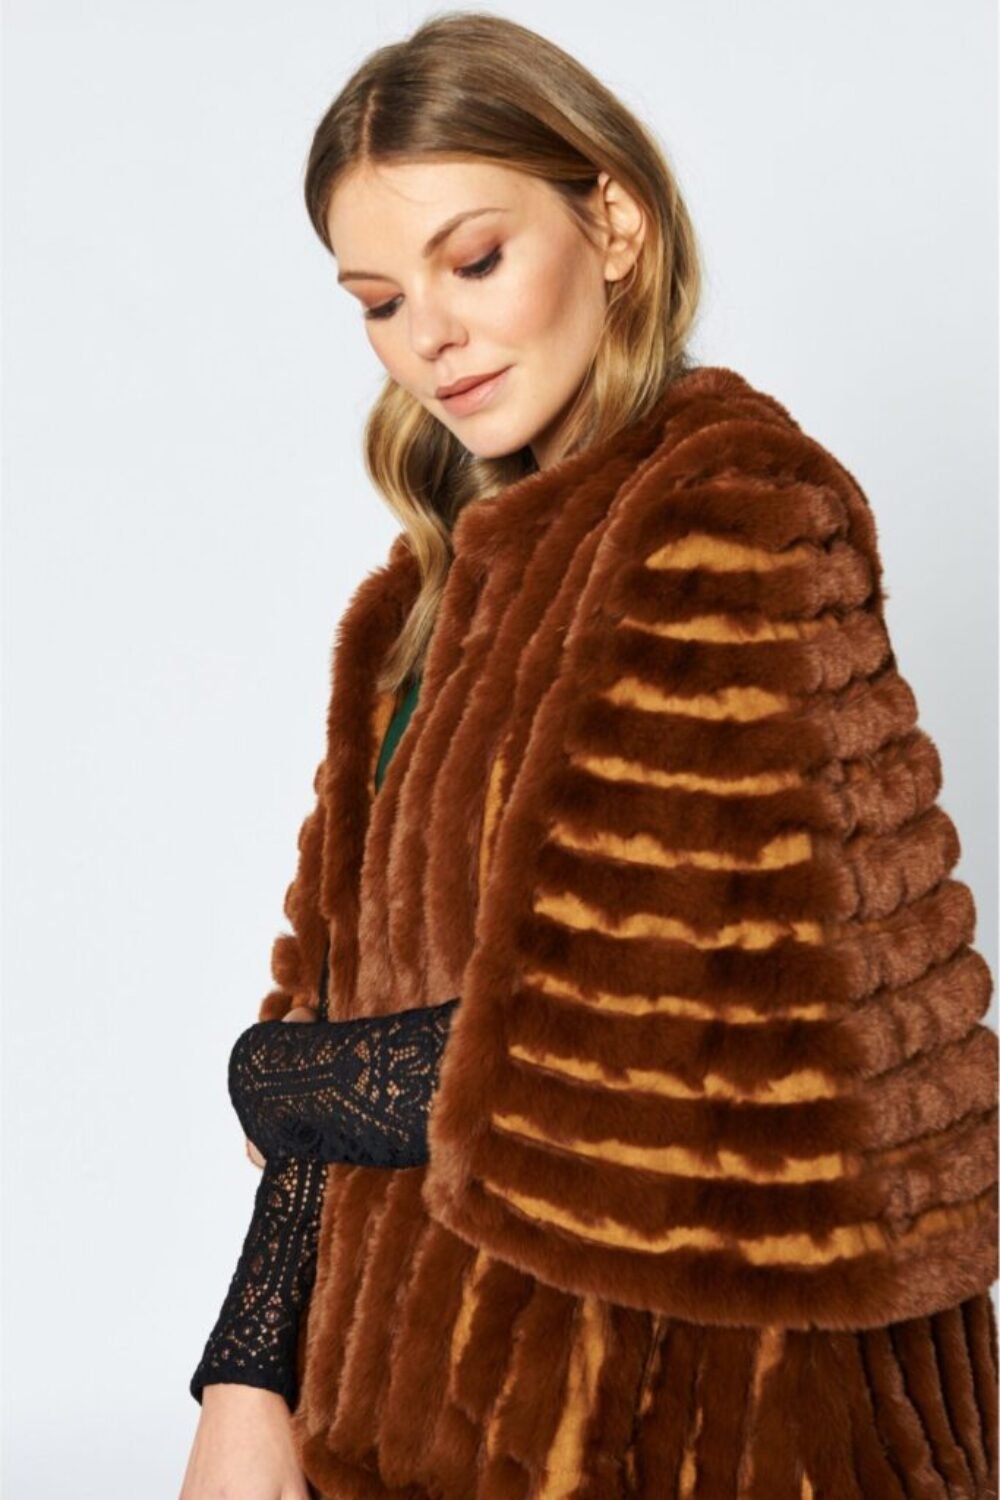 Shop Lux Chocolate Faux Fur Striped Coat and women's luxury and designer clothes at www.lux-apparel.co.uk